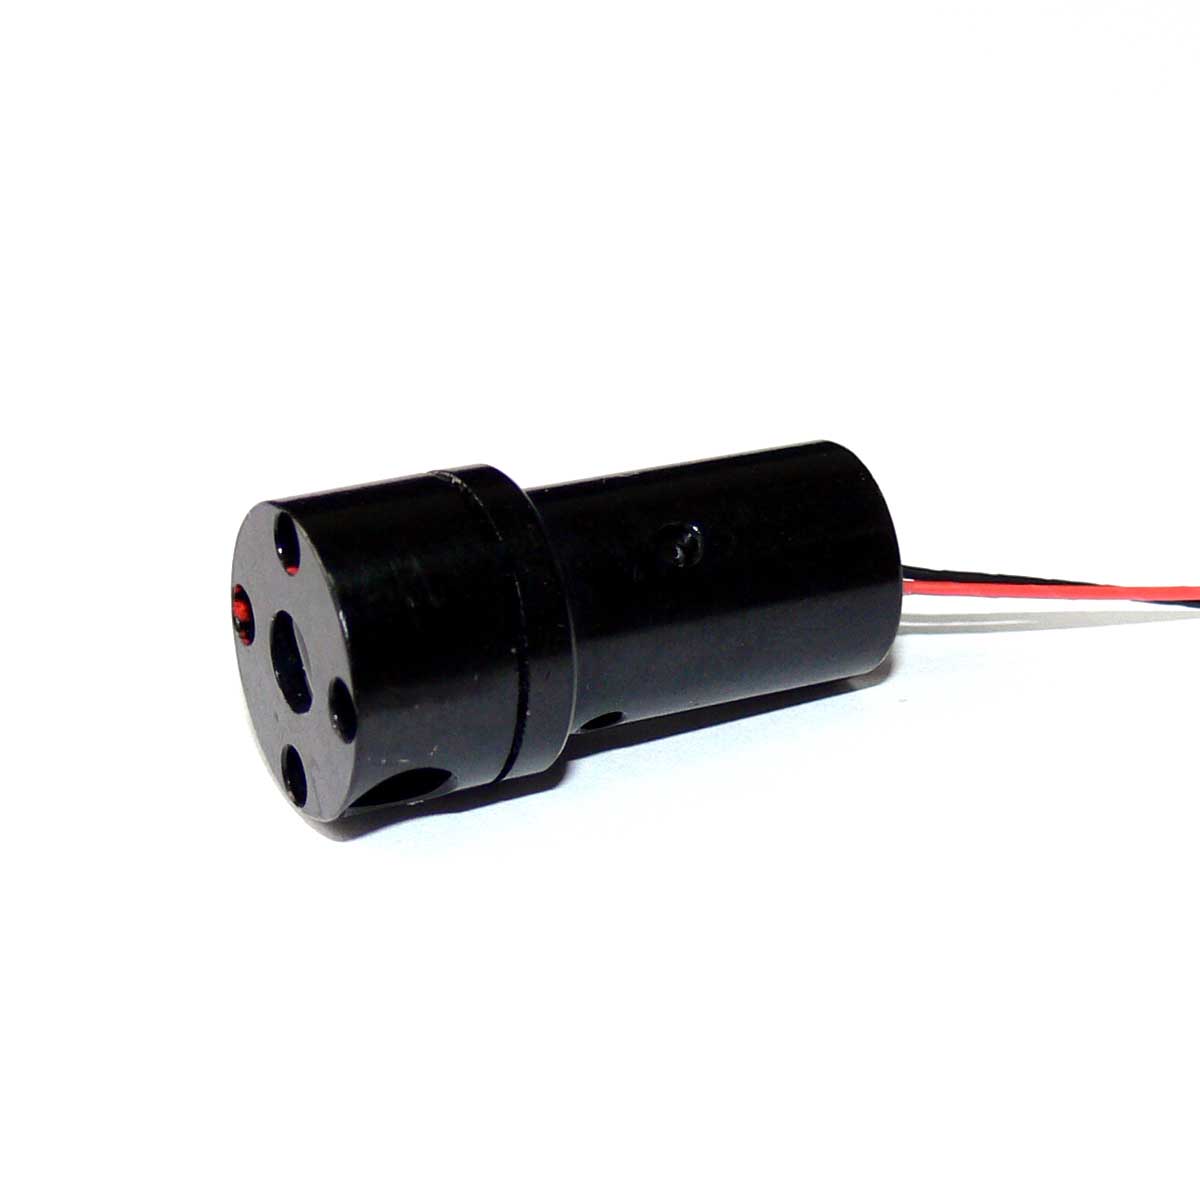 360 Degree Alignment Line Laser 660nm 2mW for Laser Distance Sensor and Precise Laser Measuring Device